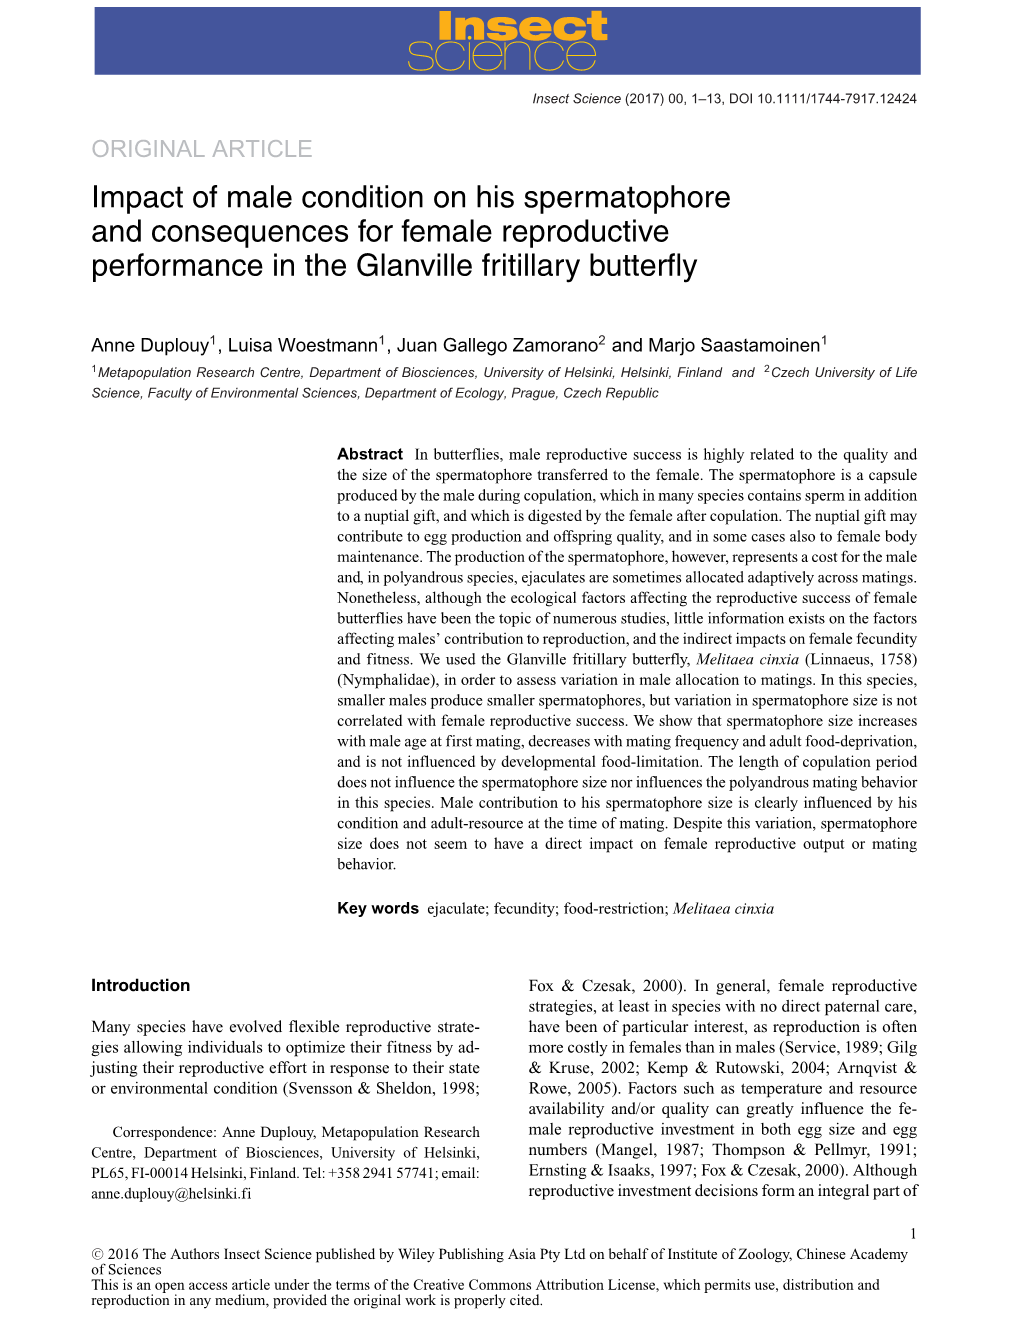 Impact of Male Condition on His Spermatophore and Consequences for Female Reproductive Performance in the Glanville Fritillary Butterﬂy